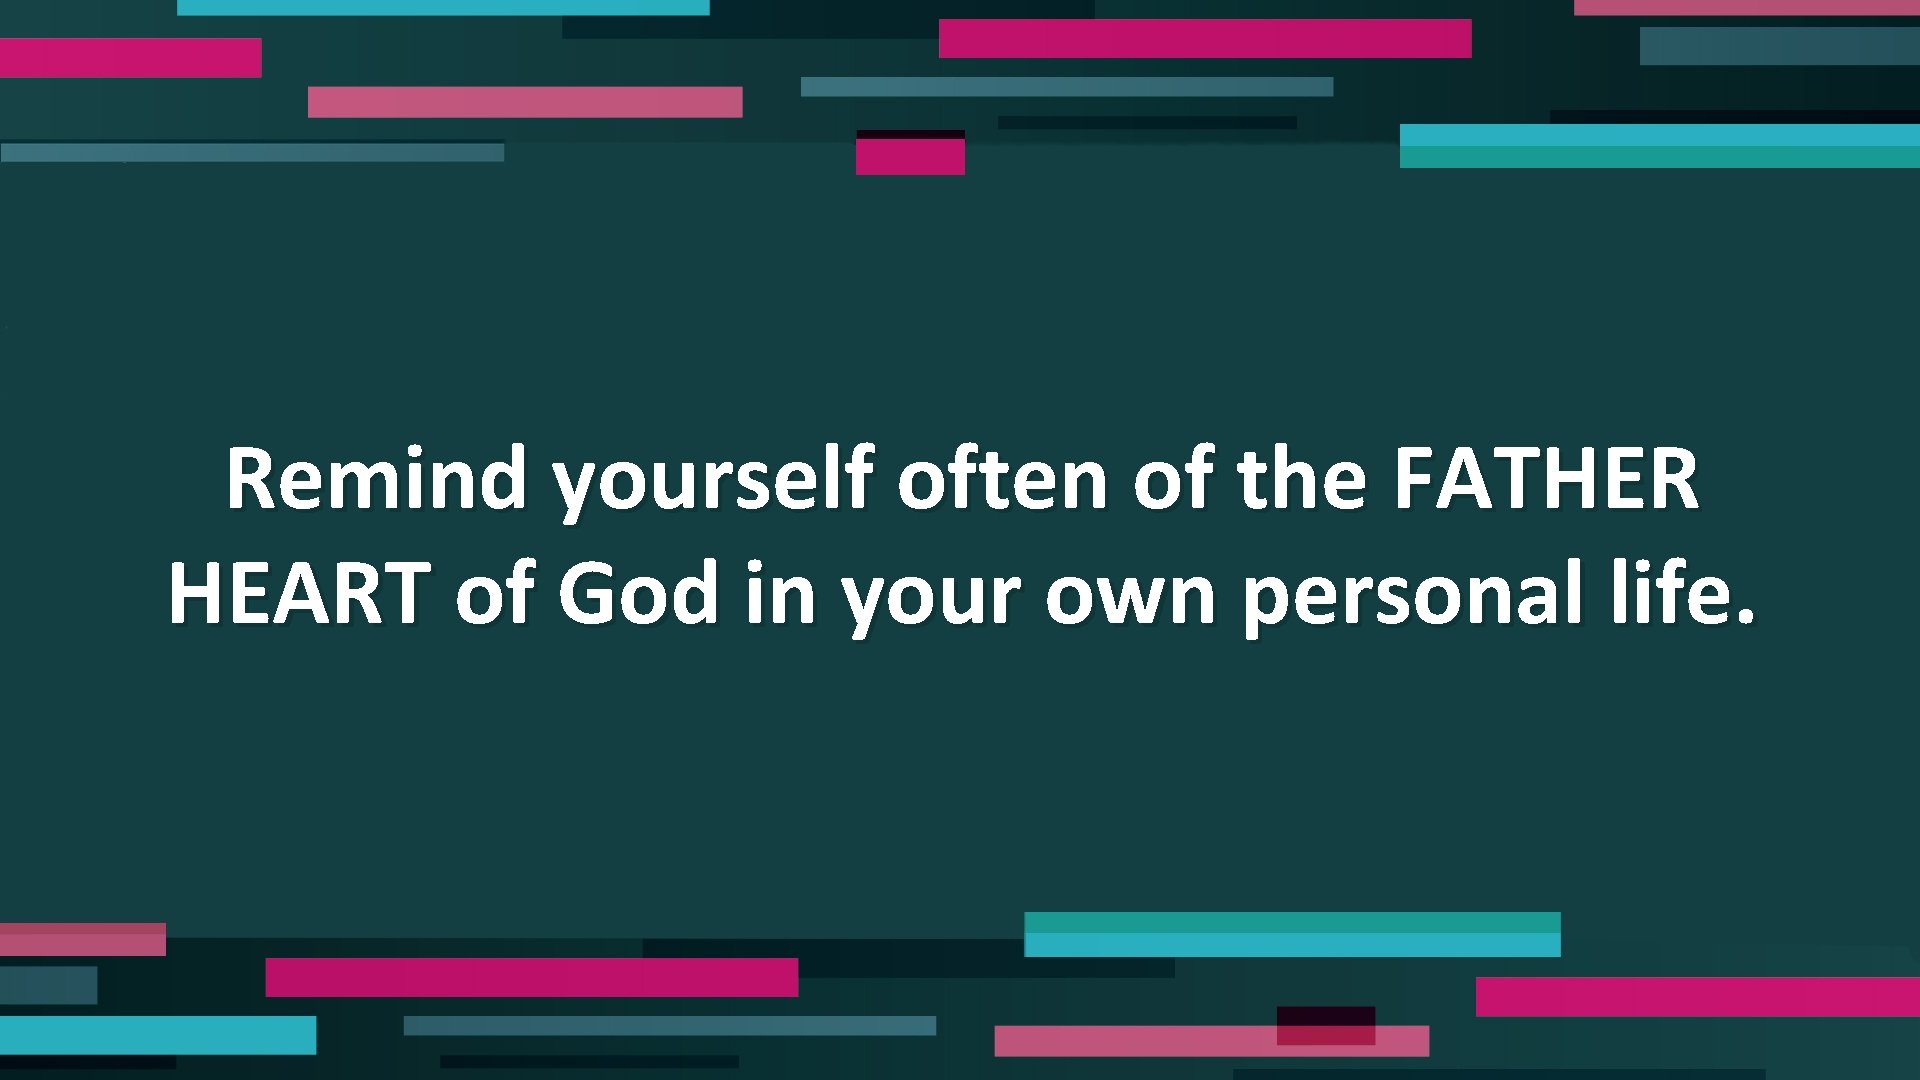 Remind yourself often of the FATHER HEART of God in your own personal life.